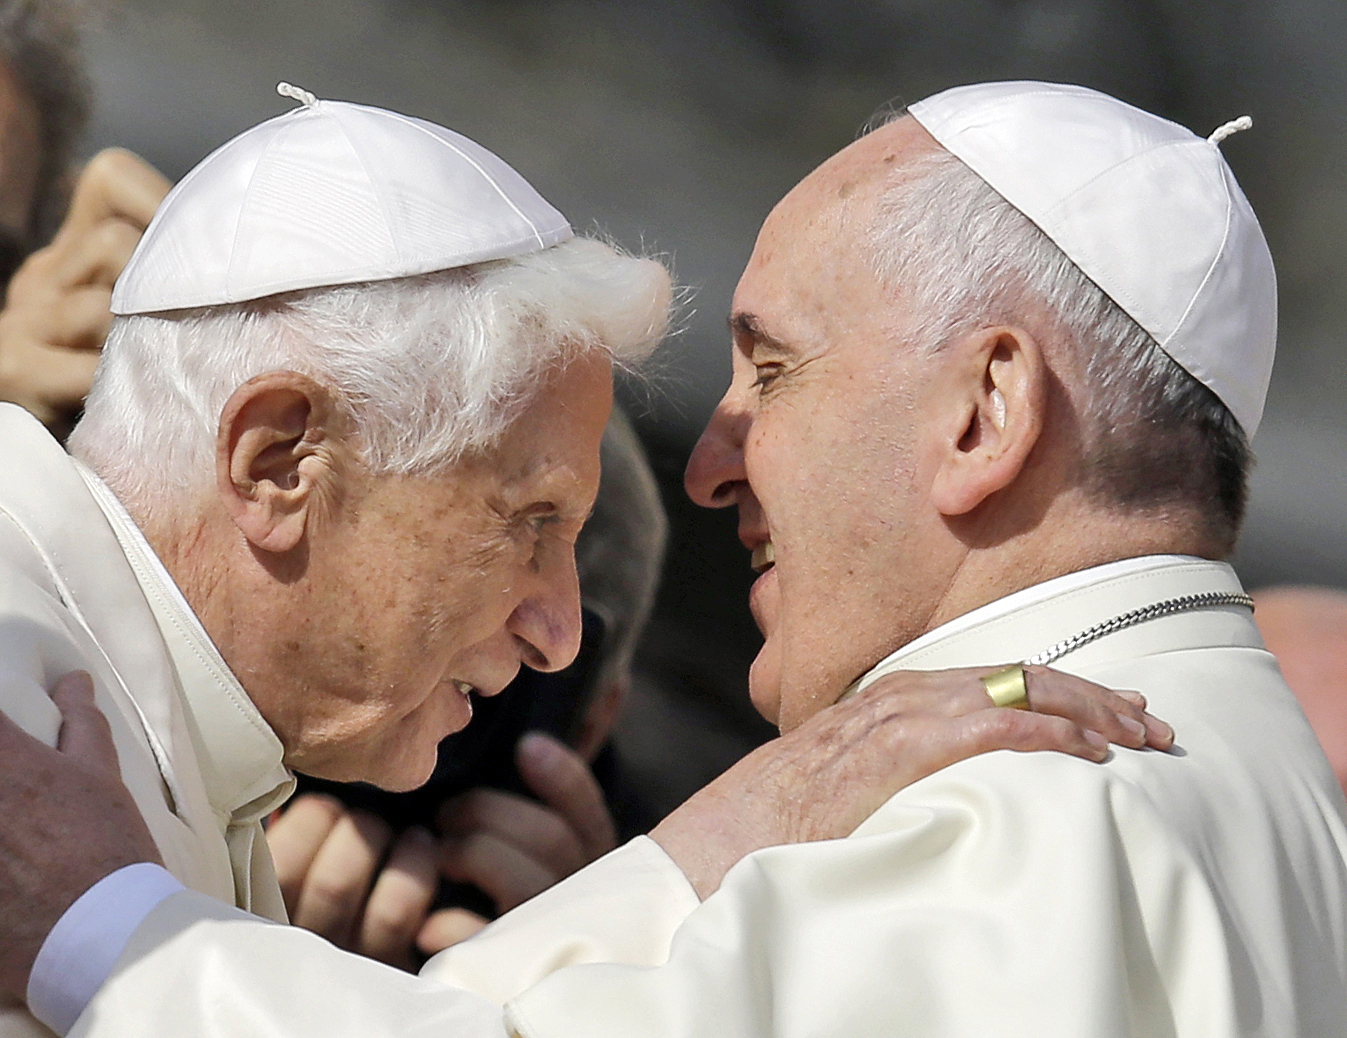 FILE - Pope Francis, right, hugs Pope Emeritus Benedict XVI prior to the start of a meeting with elderly faithful in St. Peter's Square at the Vatican, Sunday, Sept. 28, 2014. A long-awaited report on sexual abuse in Germany’s Munich diocese on Thursday faulted retired Pope Benedict XVI’s handling of four cases when he was archbishop in the 1970s and 1980s. (AP Photo/Gregorio Borgia, File)